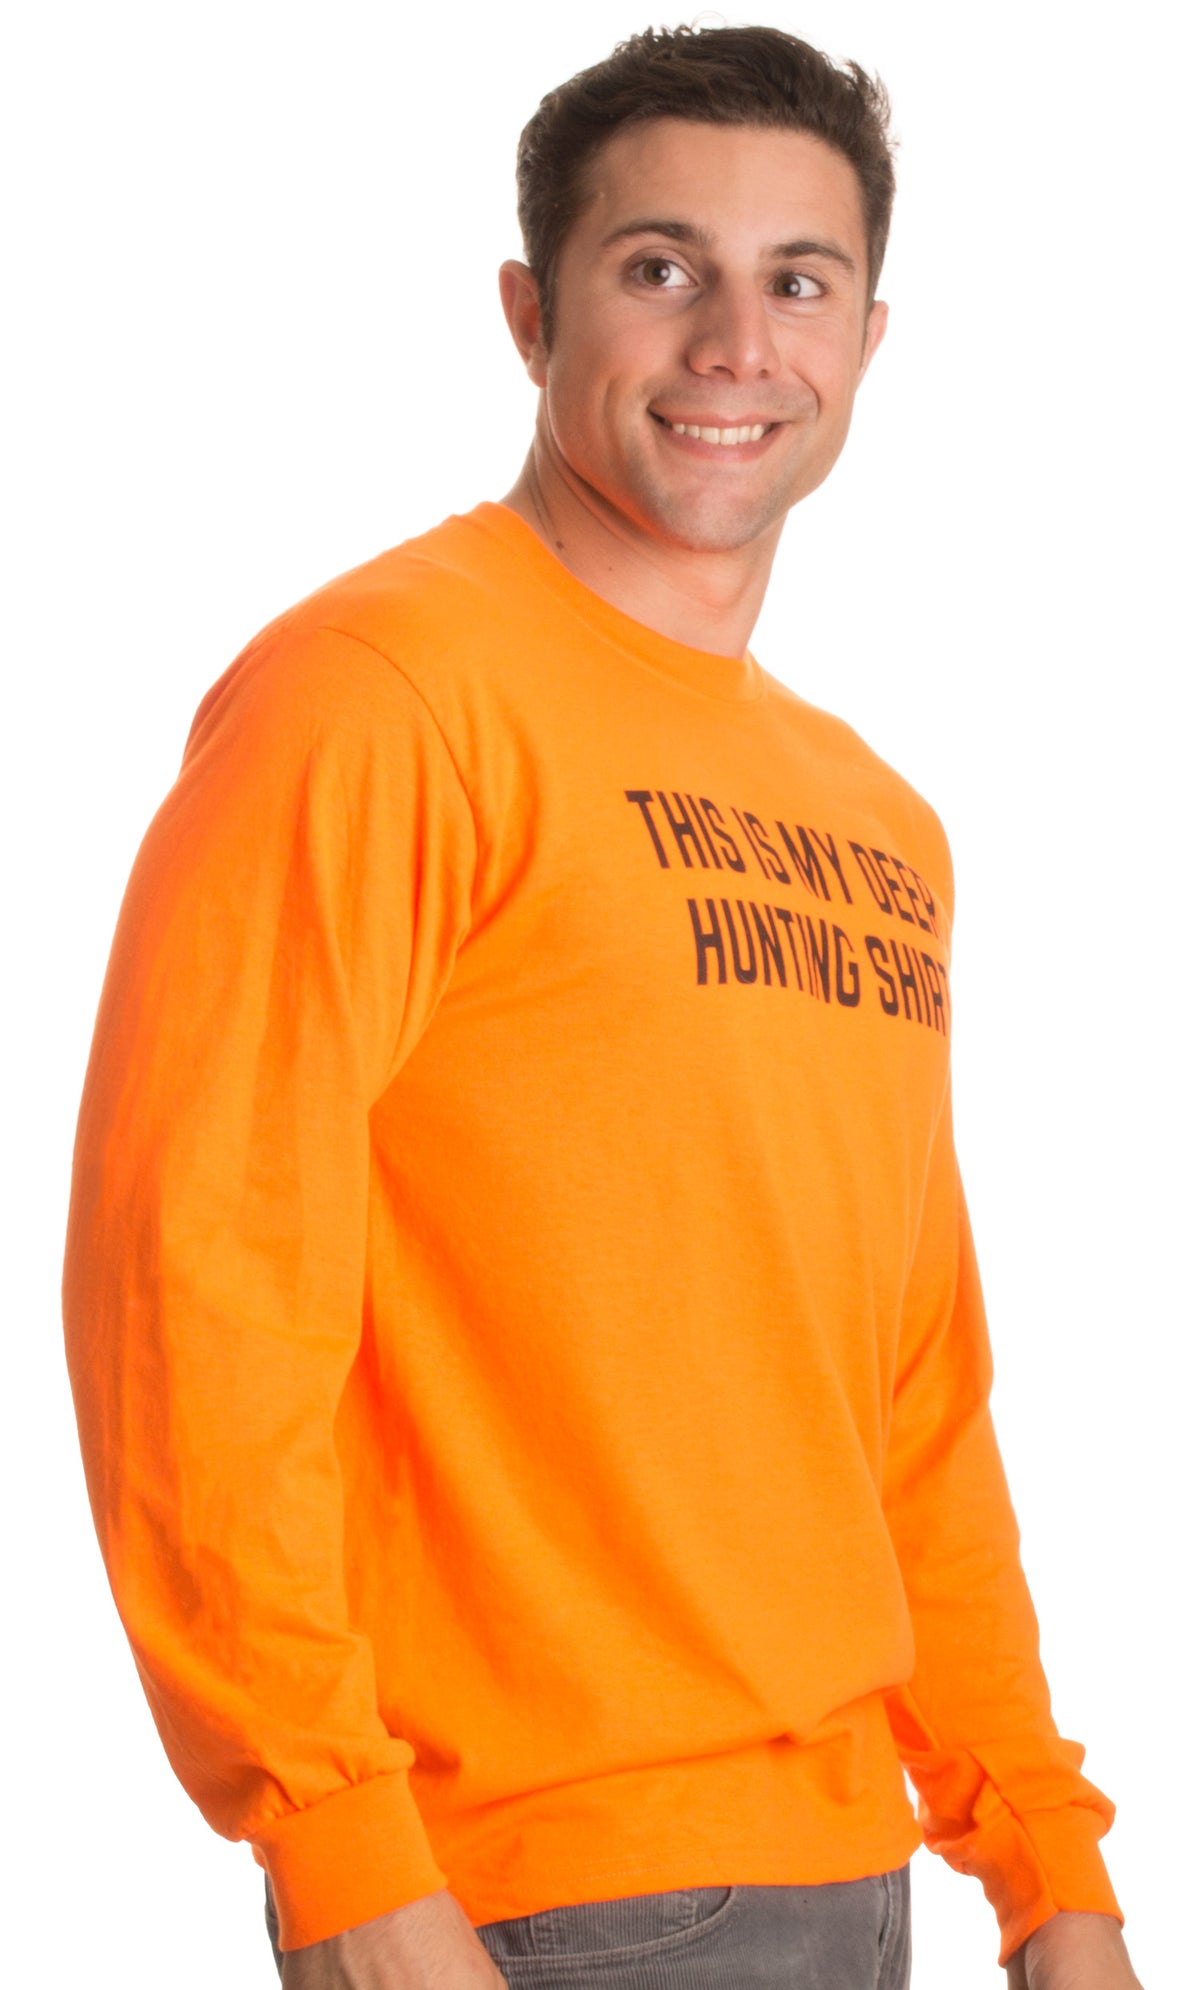 This is my Deer Hunting Shirt | Funny Hunter Blaze Orange Safety Clothes T-shirt